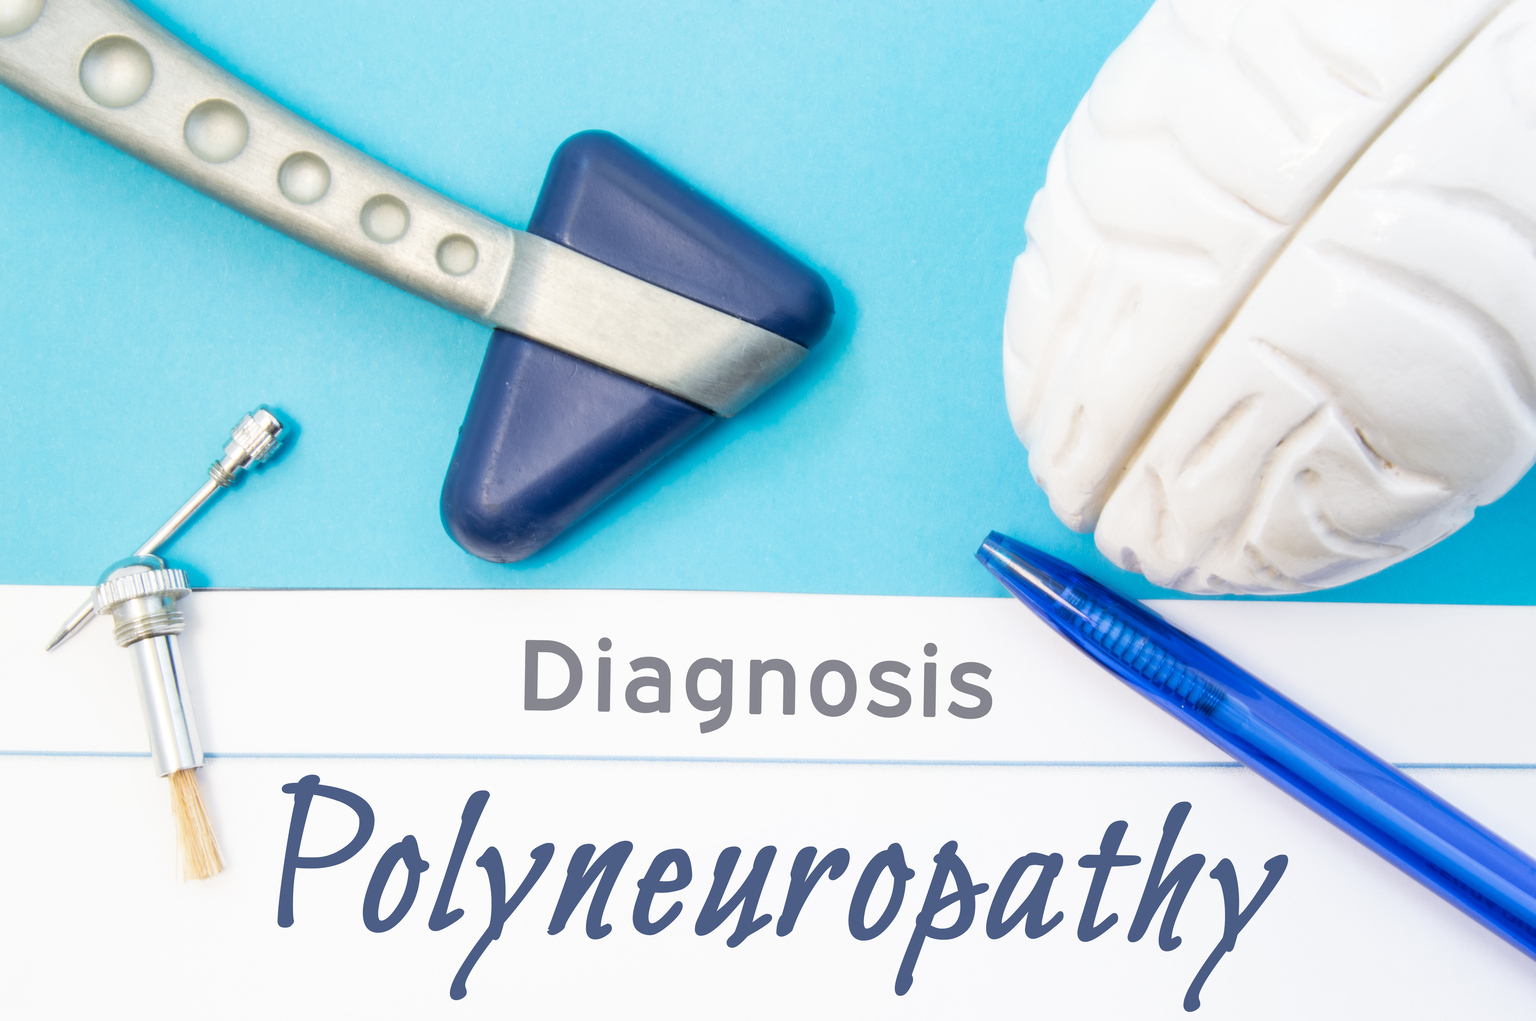 Neurological diagnosis of Polyneuropathy. Neurological hammer, human brain figure, tools for sensitivity testing are next to title of text diagnosis of Polyneuropathy in the workplace of neurologist